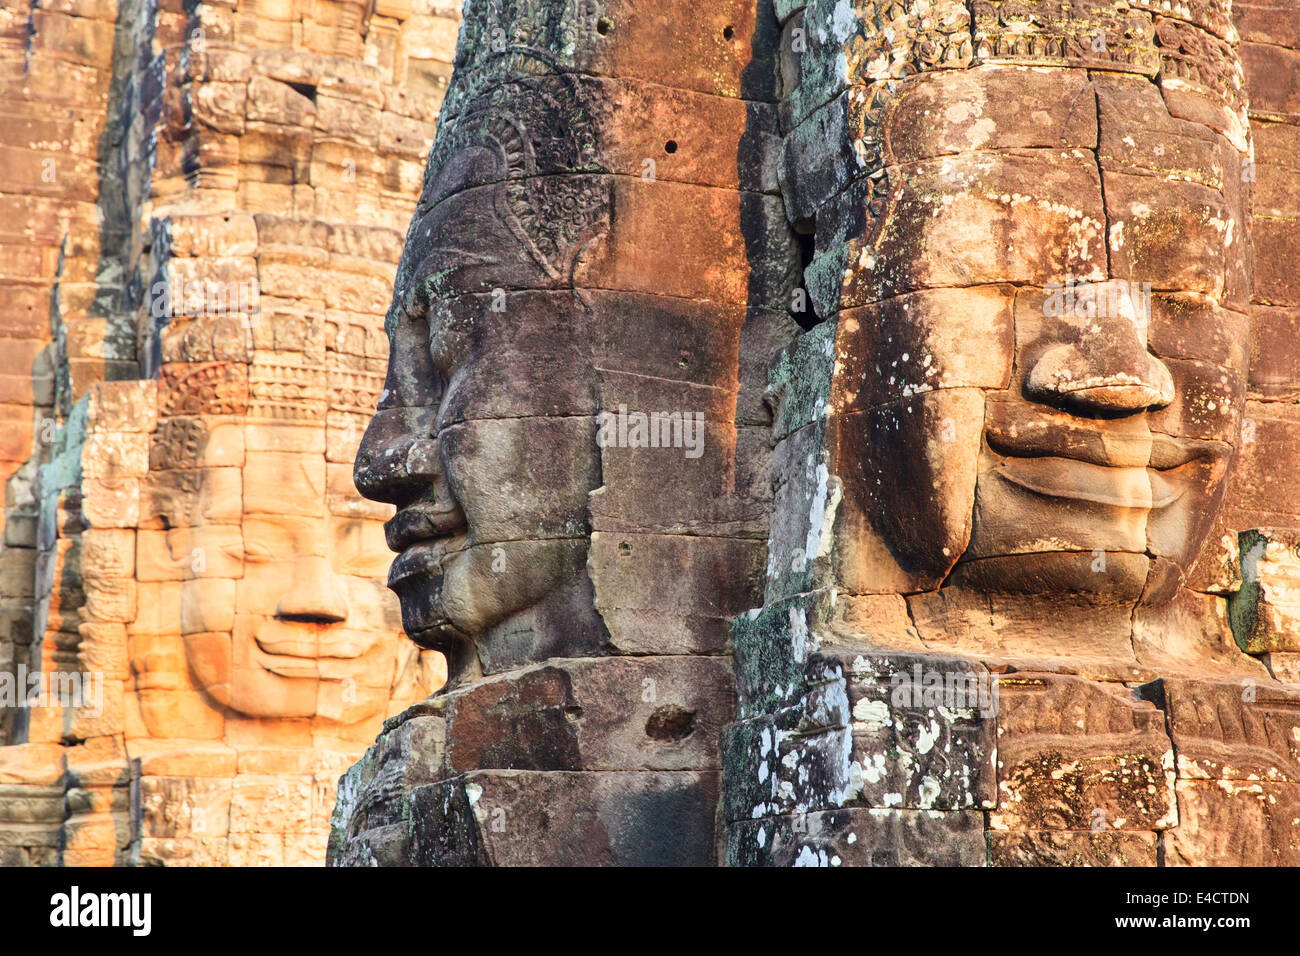 Carved faces in the sunset at the Bayon Temple, Angkor temple complex, Angkor Wat, Siem Reap, Cambodia. Stock Photo